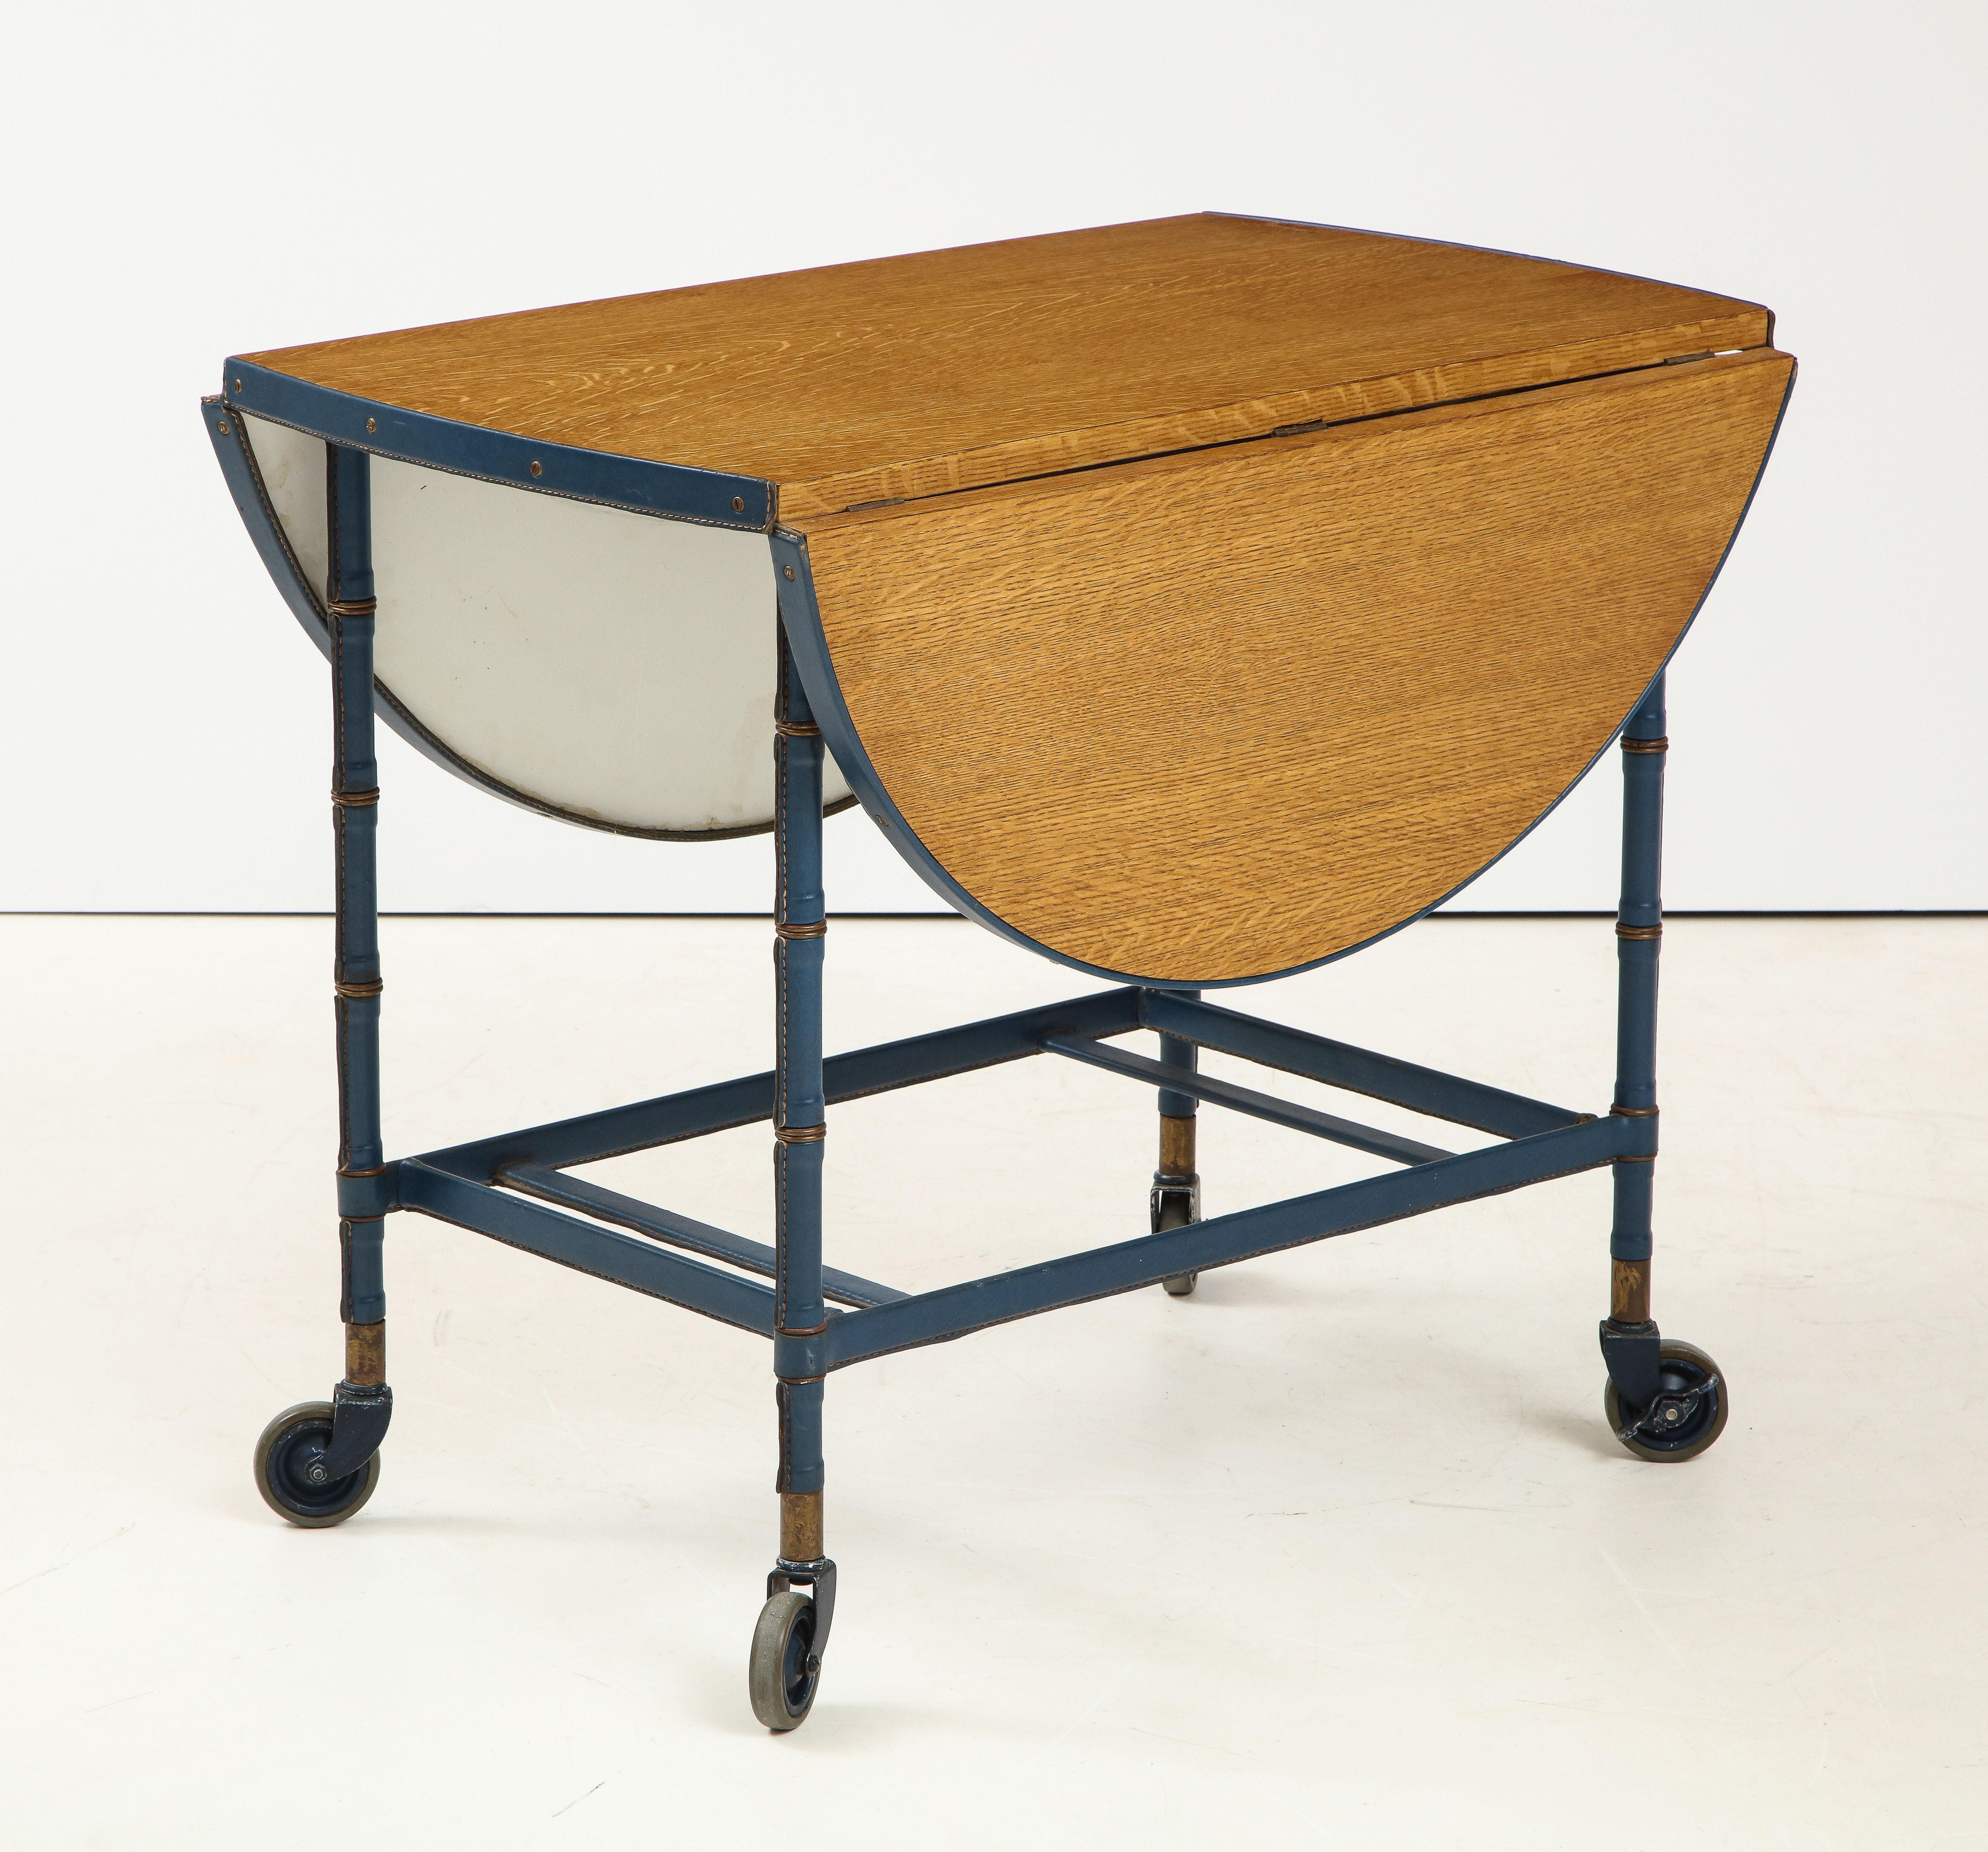 Mid-Century Modern Rare Oak and Blue Stitched Leather Drop-Leaf Table / Bar Cart by Jacques Adnet For Sale